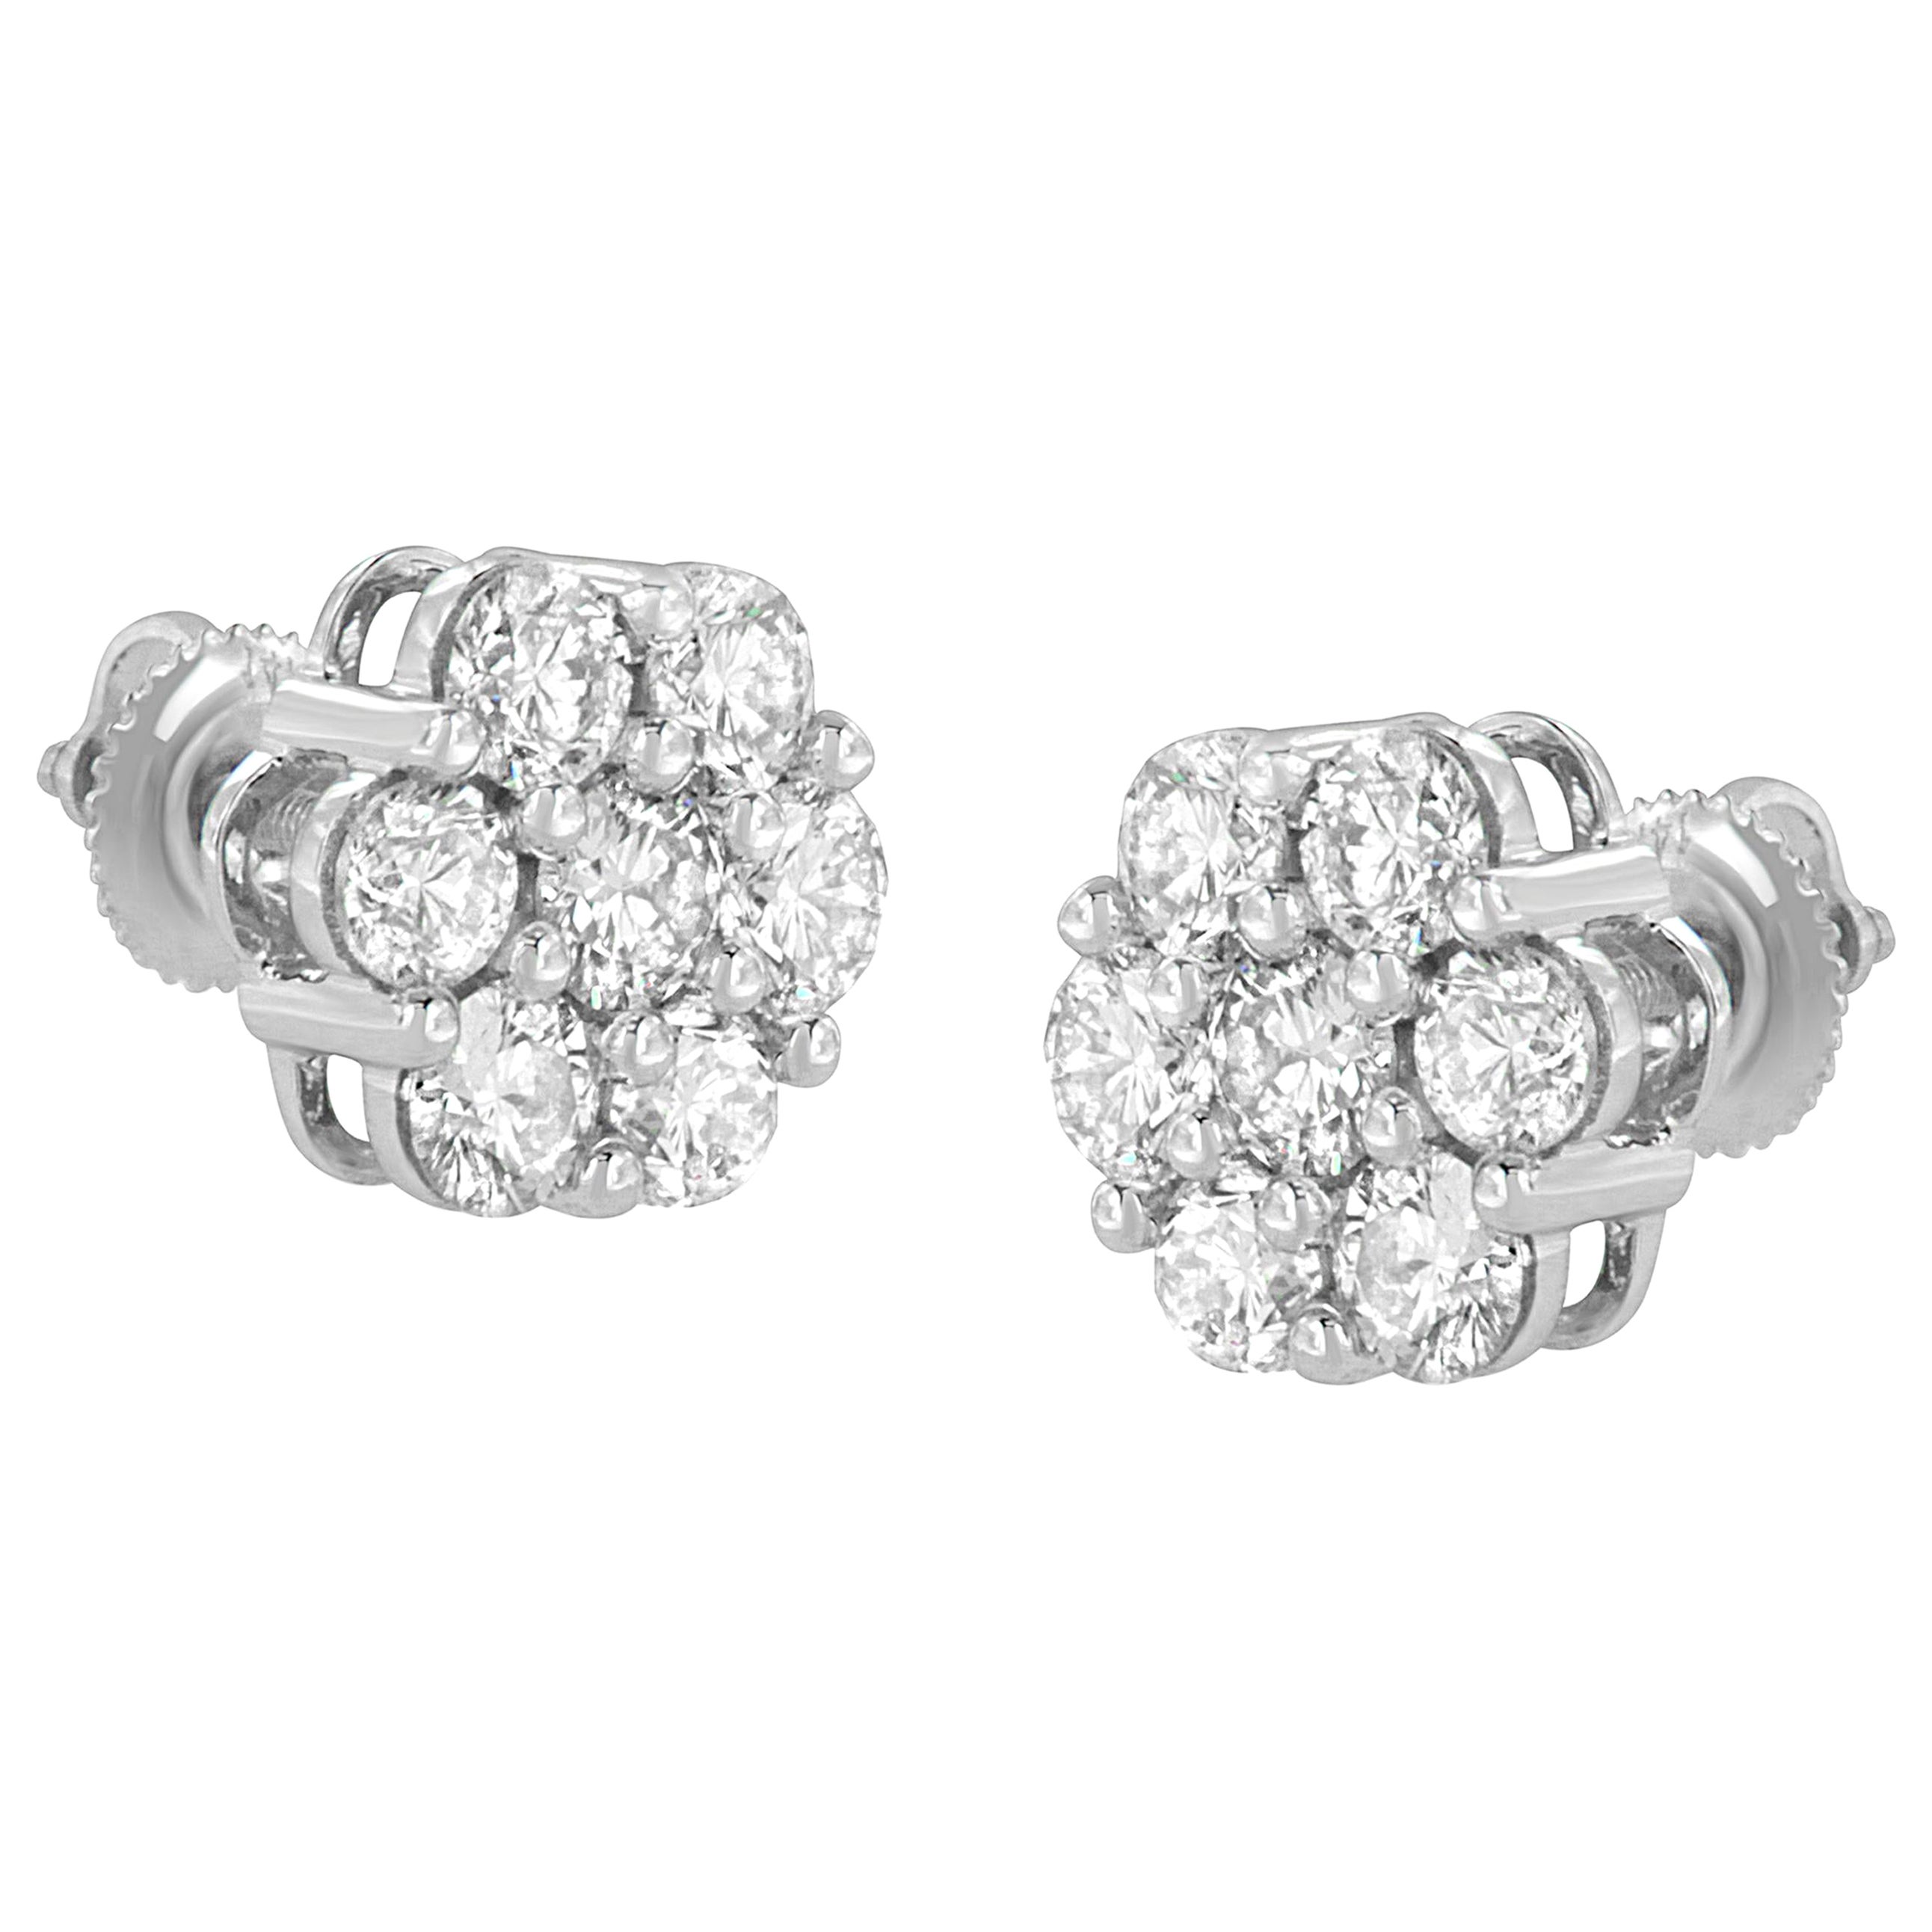 14K White Gold 3.0 Carat Round-Cut Diamond Floral Cluster Stud Earring